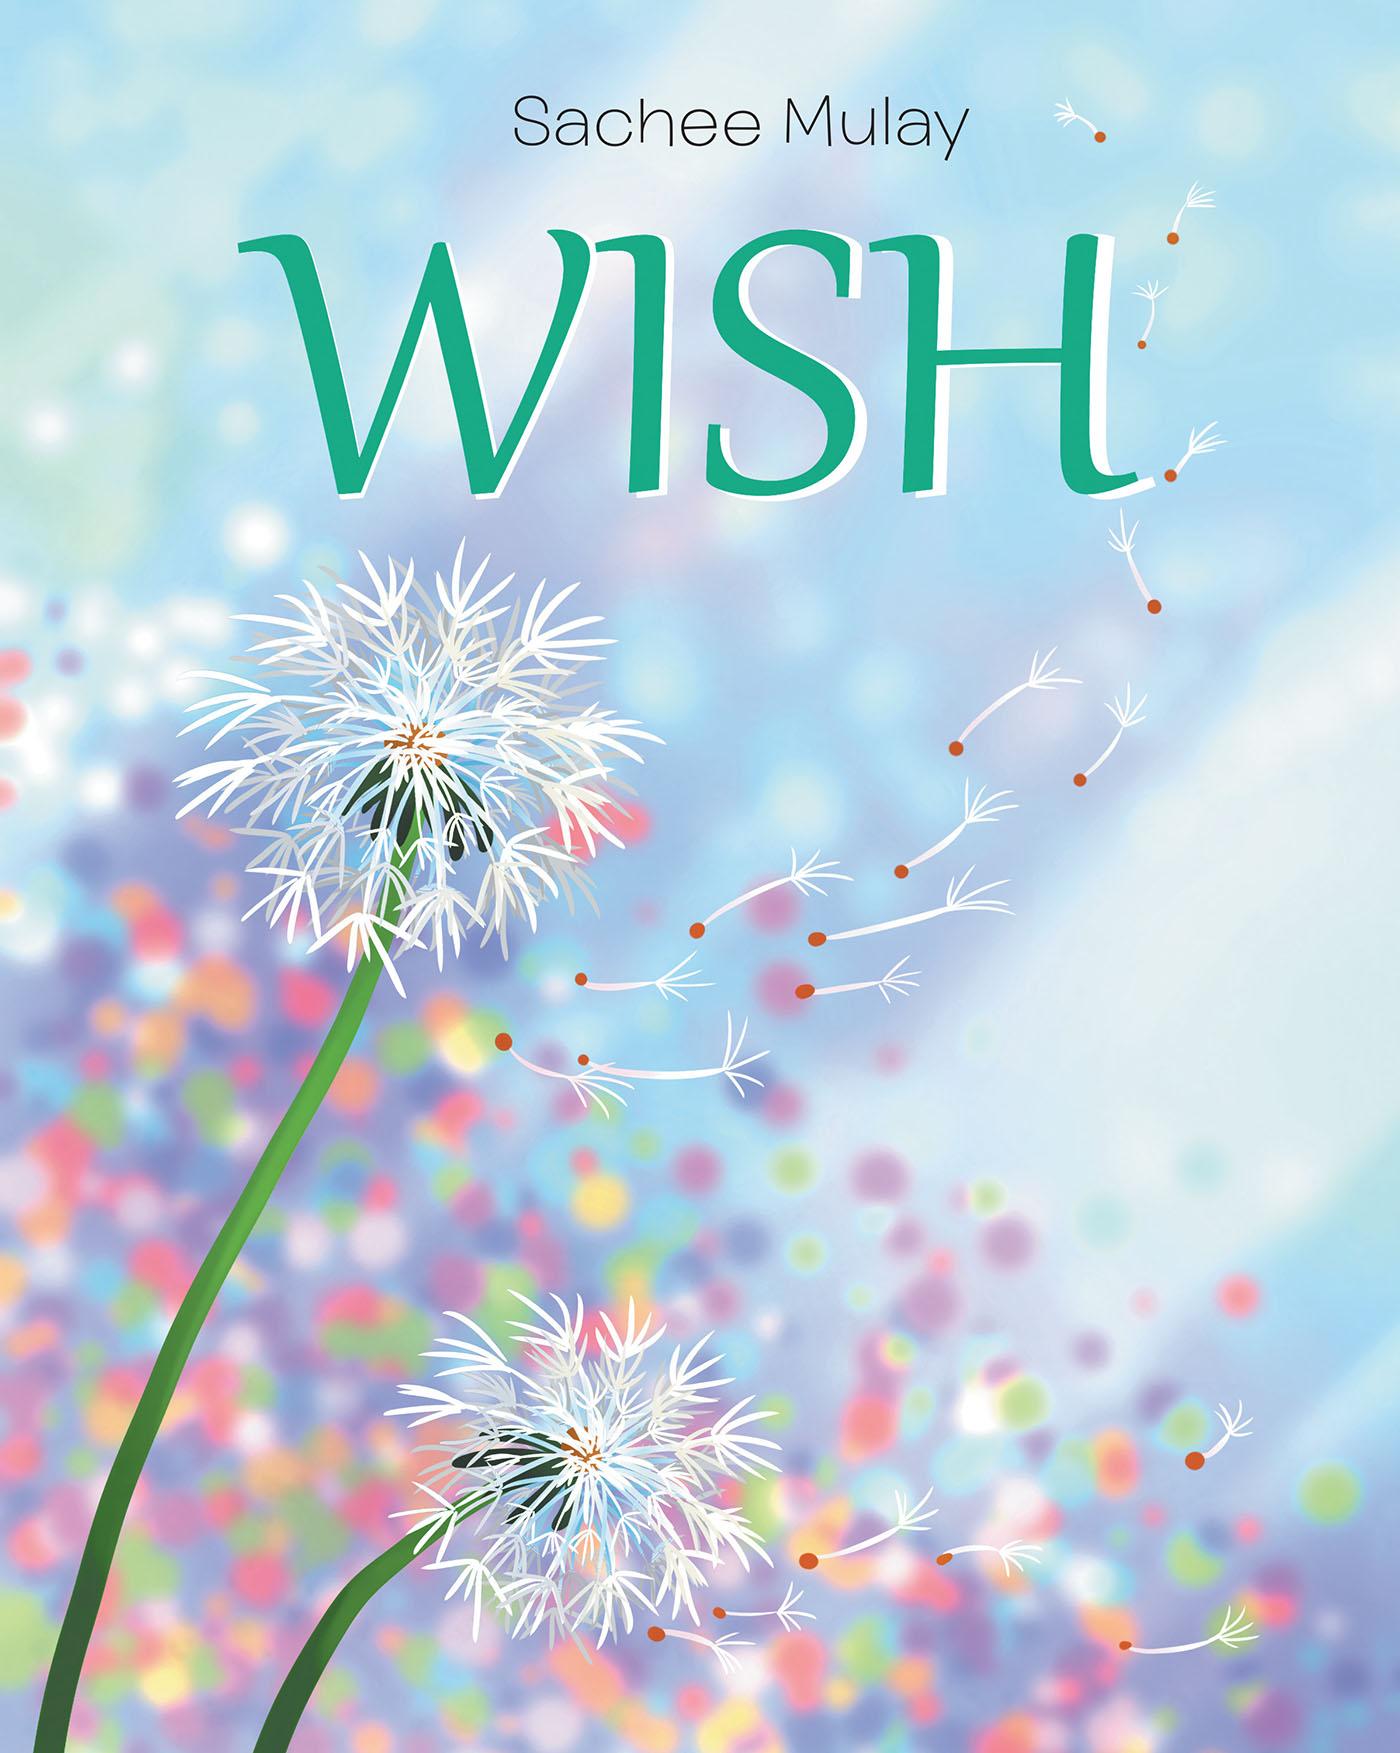 Wish Cover Image